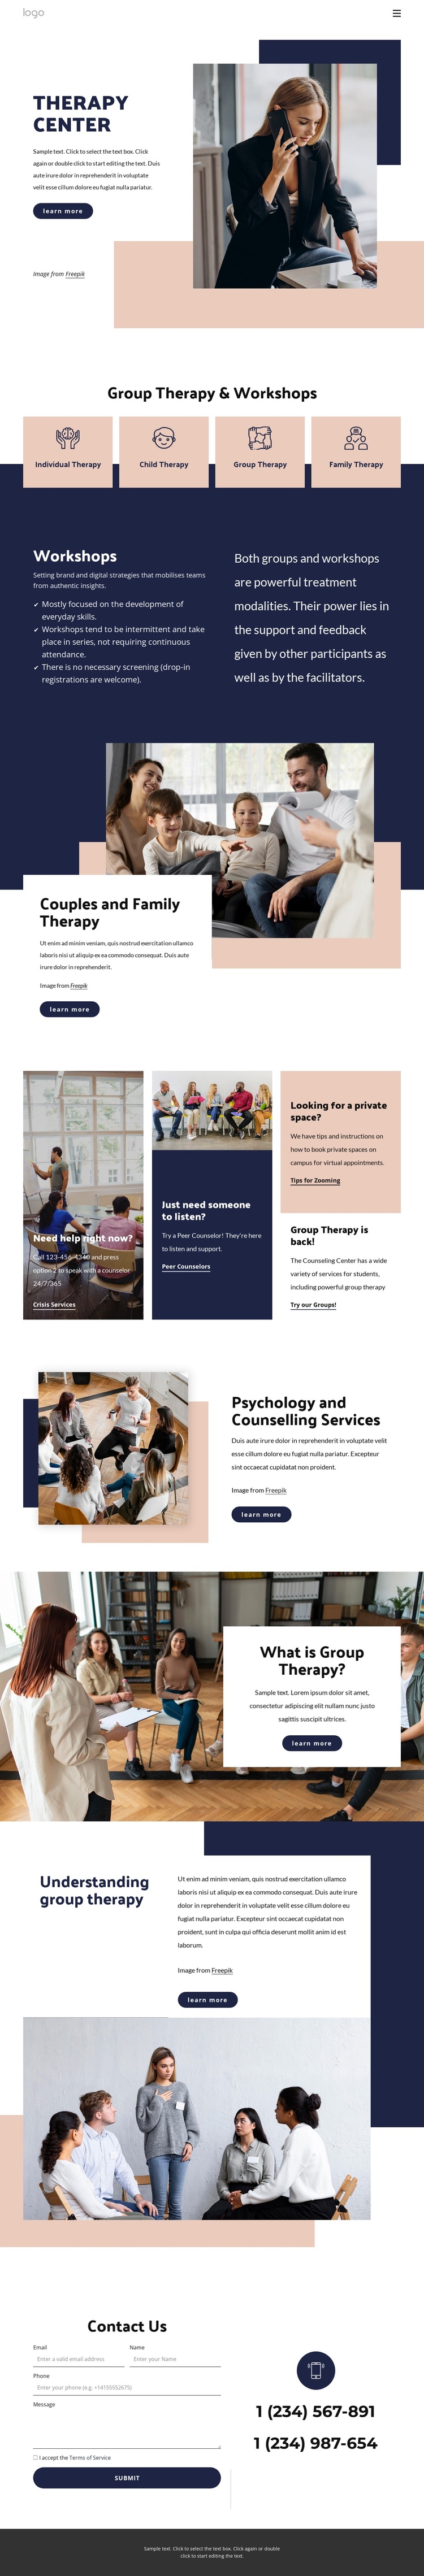 Therapy center Website Builder Software